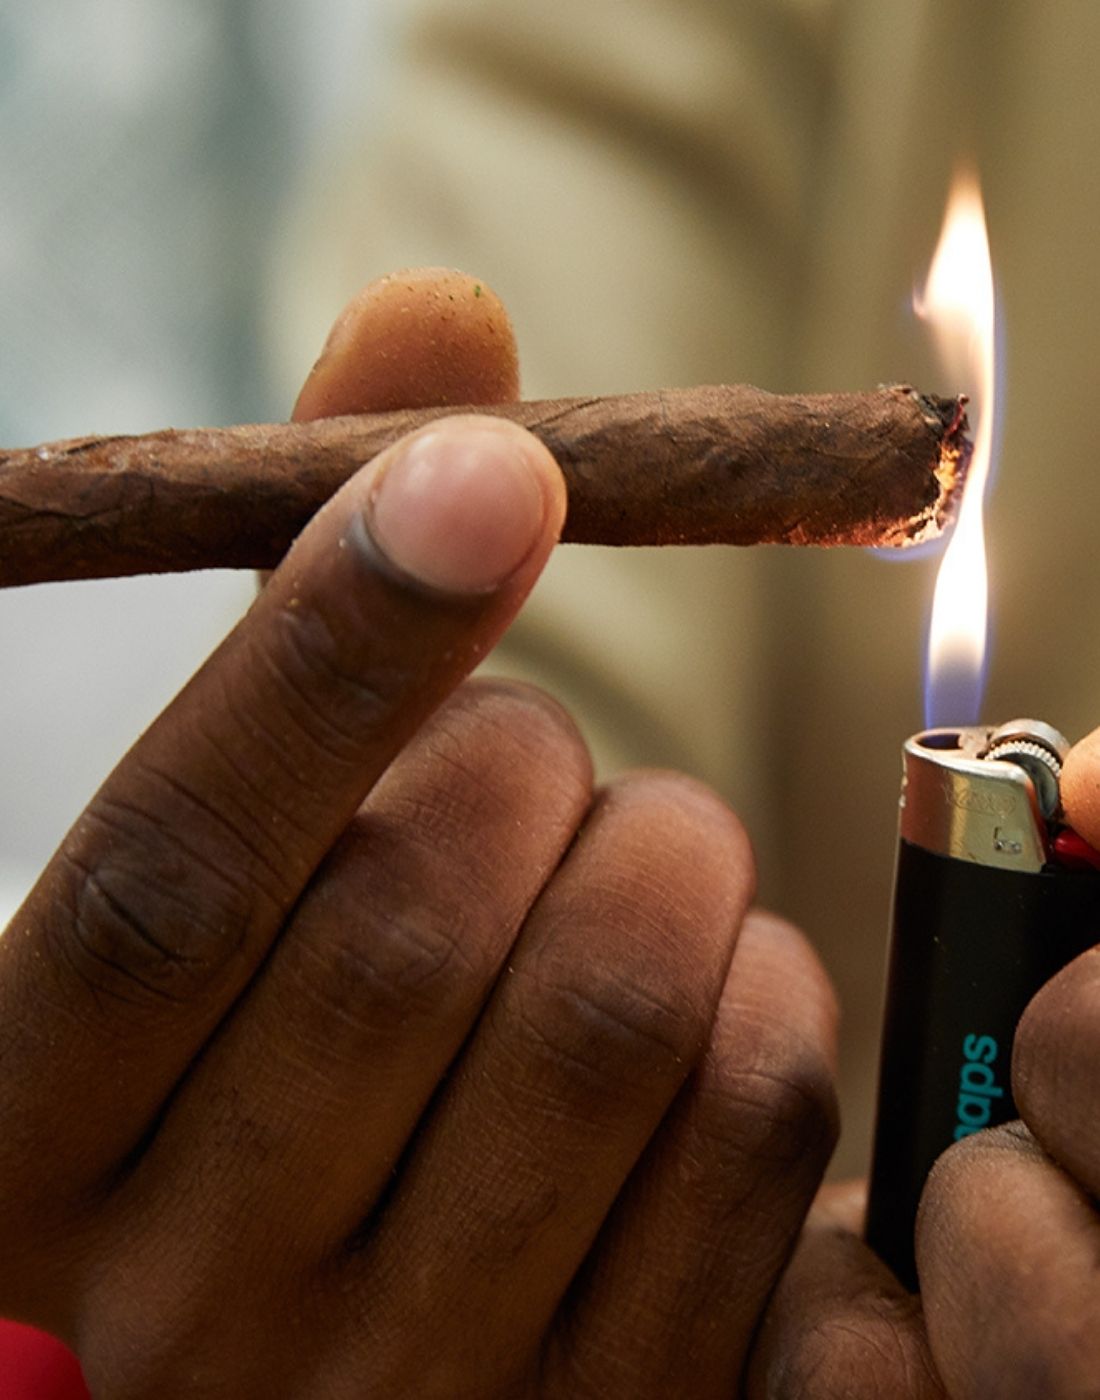 Rolling Papers, Bongs, Blunts in India